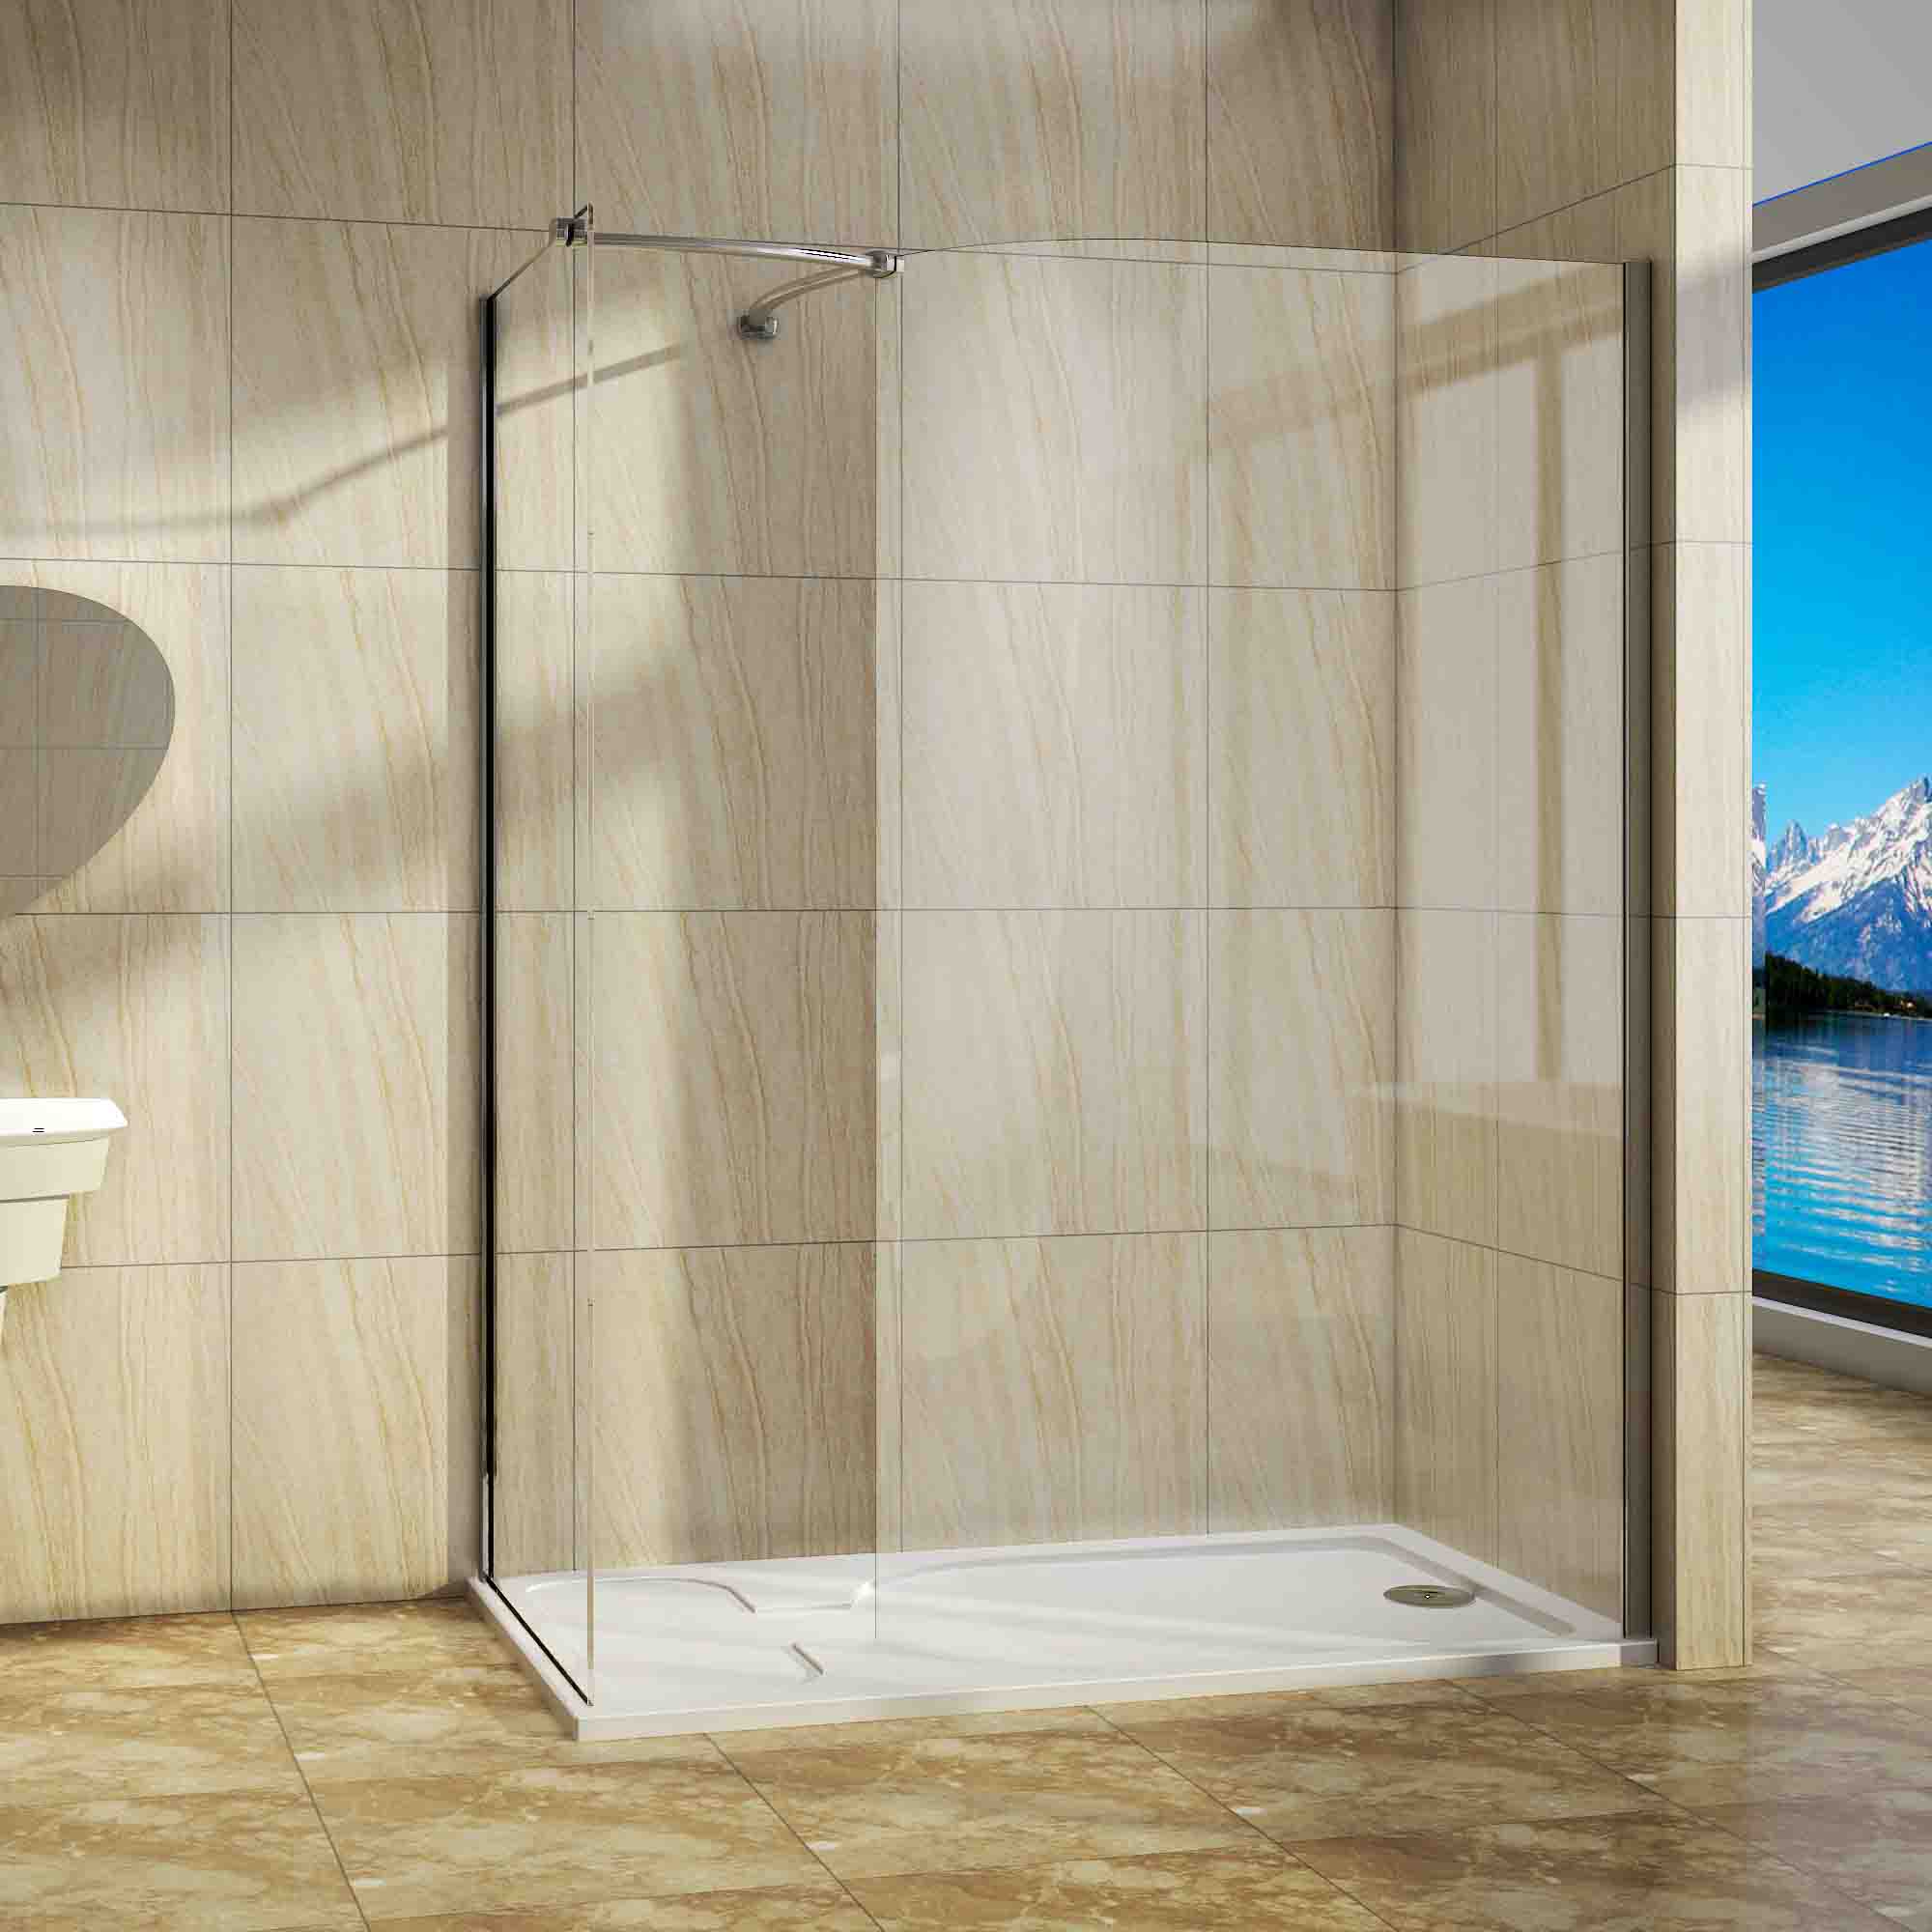 Walk In Wet Room Shower Enclosure Stone Tray Curved Glass Cubicle Screen Panel | eBay